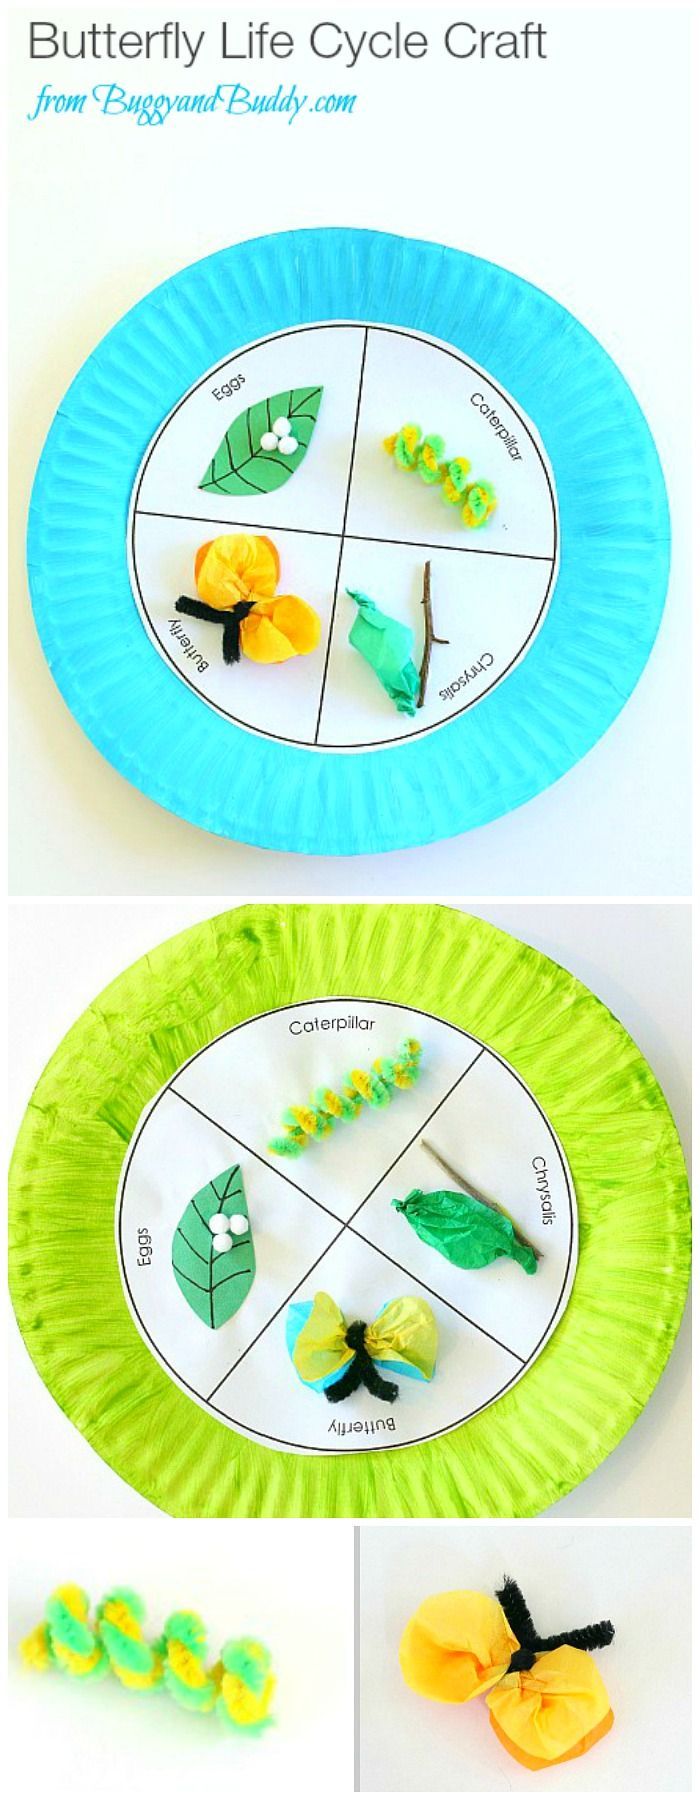 Paper Plate Butterfly Life Cycle Craft for Kids (with FREE printable template)- Fun spring and science activity for kids! ~